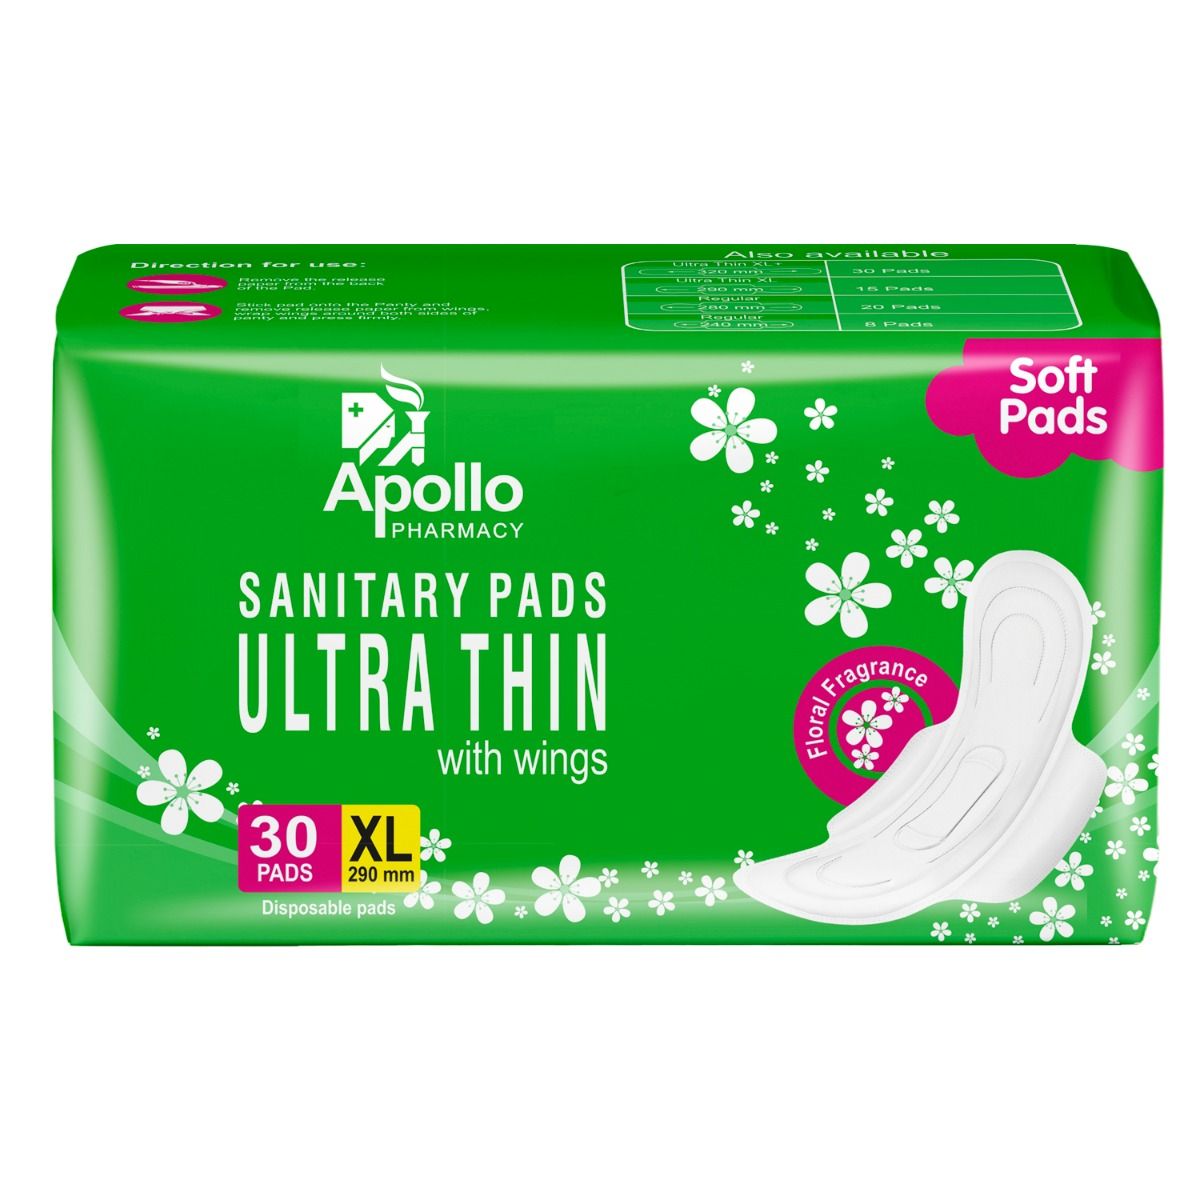 Apollo Pharmacy Ultrathin Sanitary Pads XL with Wings, 30 Count, Pack of 1 